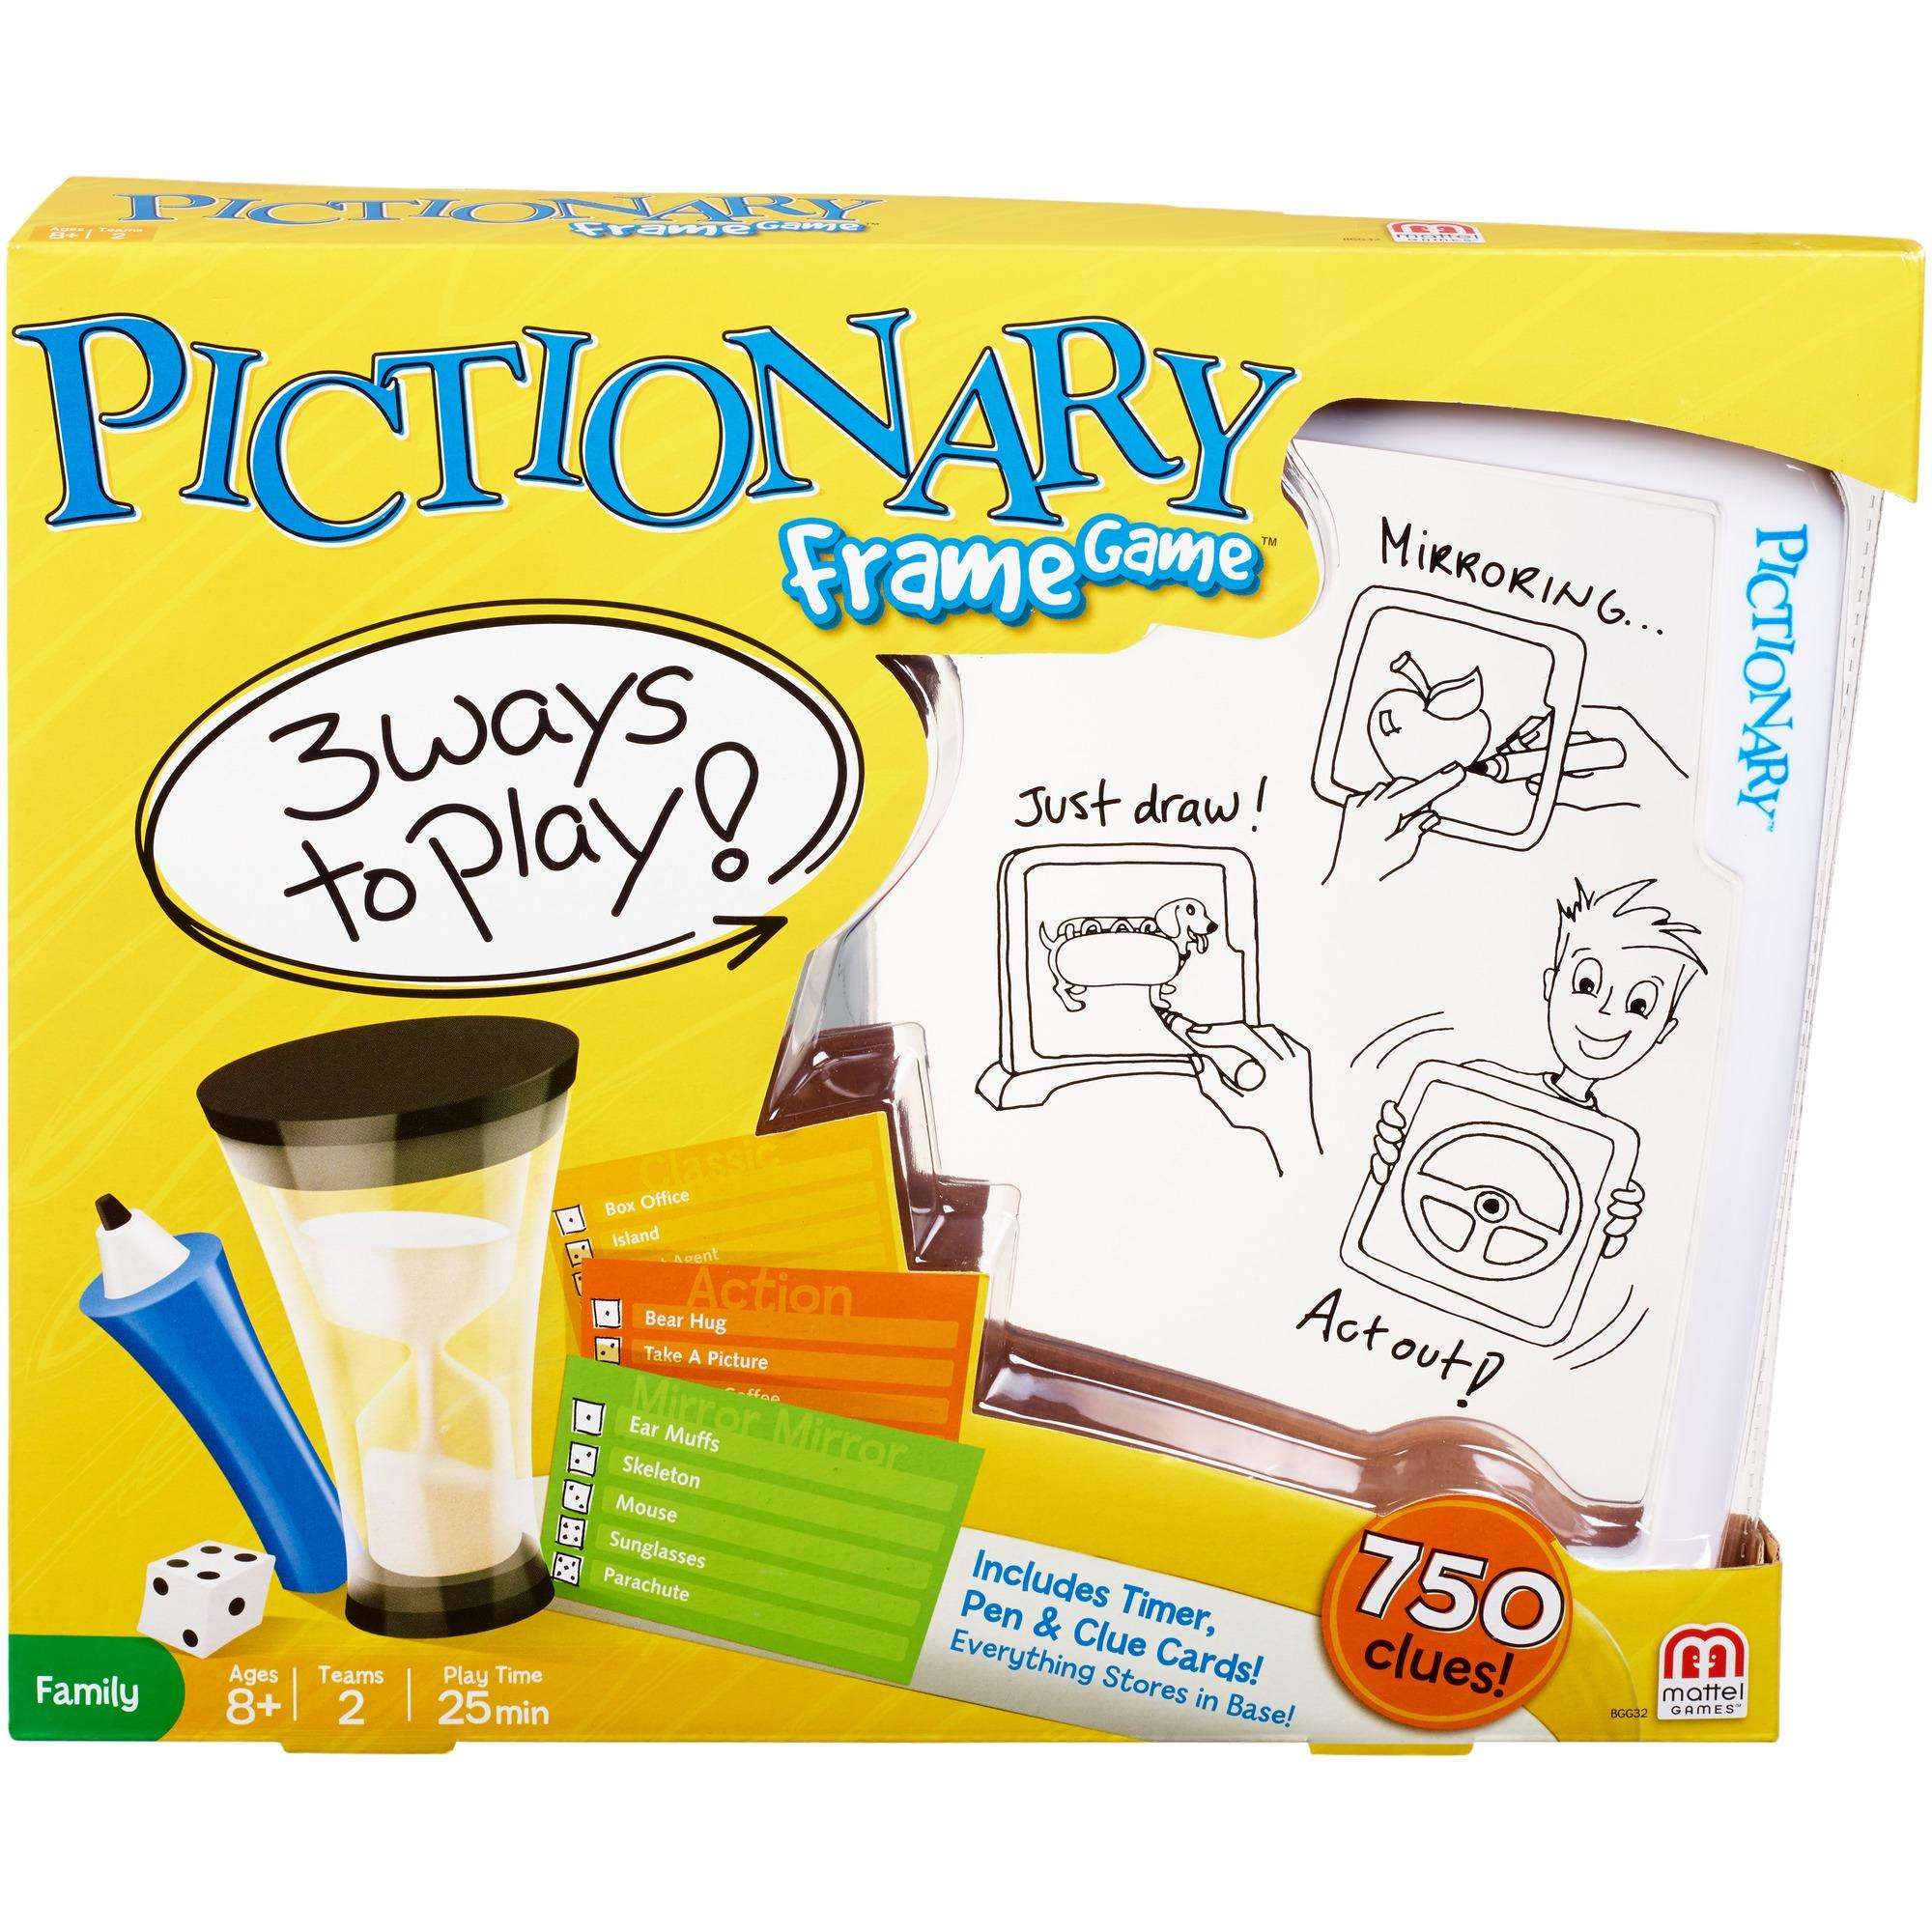 Pictionary Frame Game with 3 Ways to Play for 2 Teams Ages 8Y+ - image 1 of 8